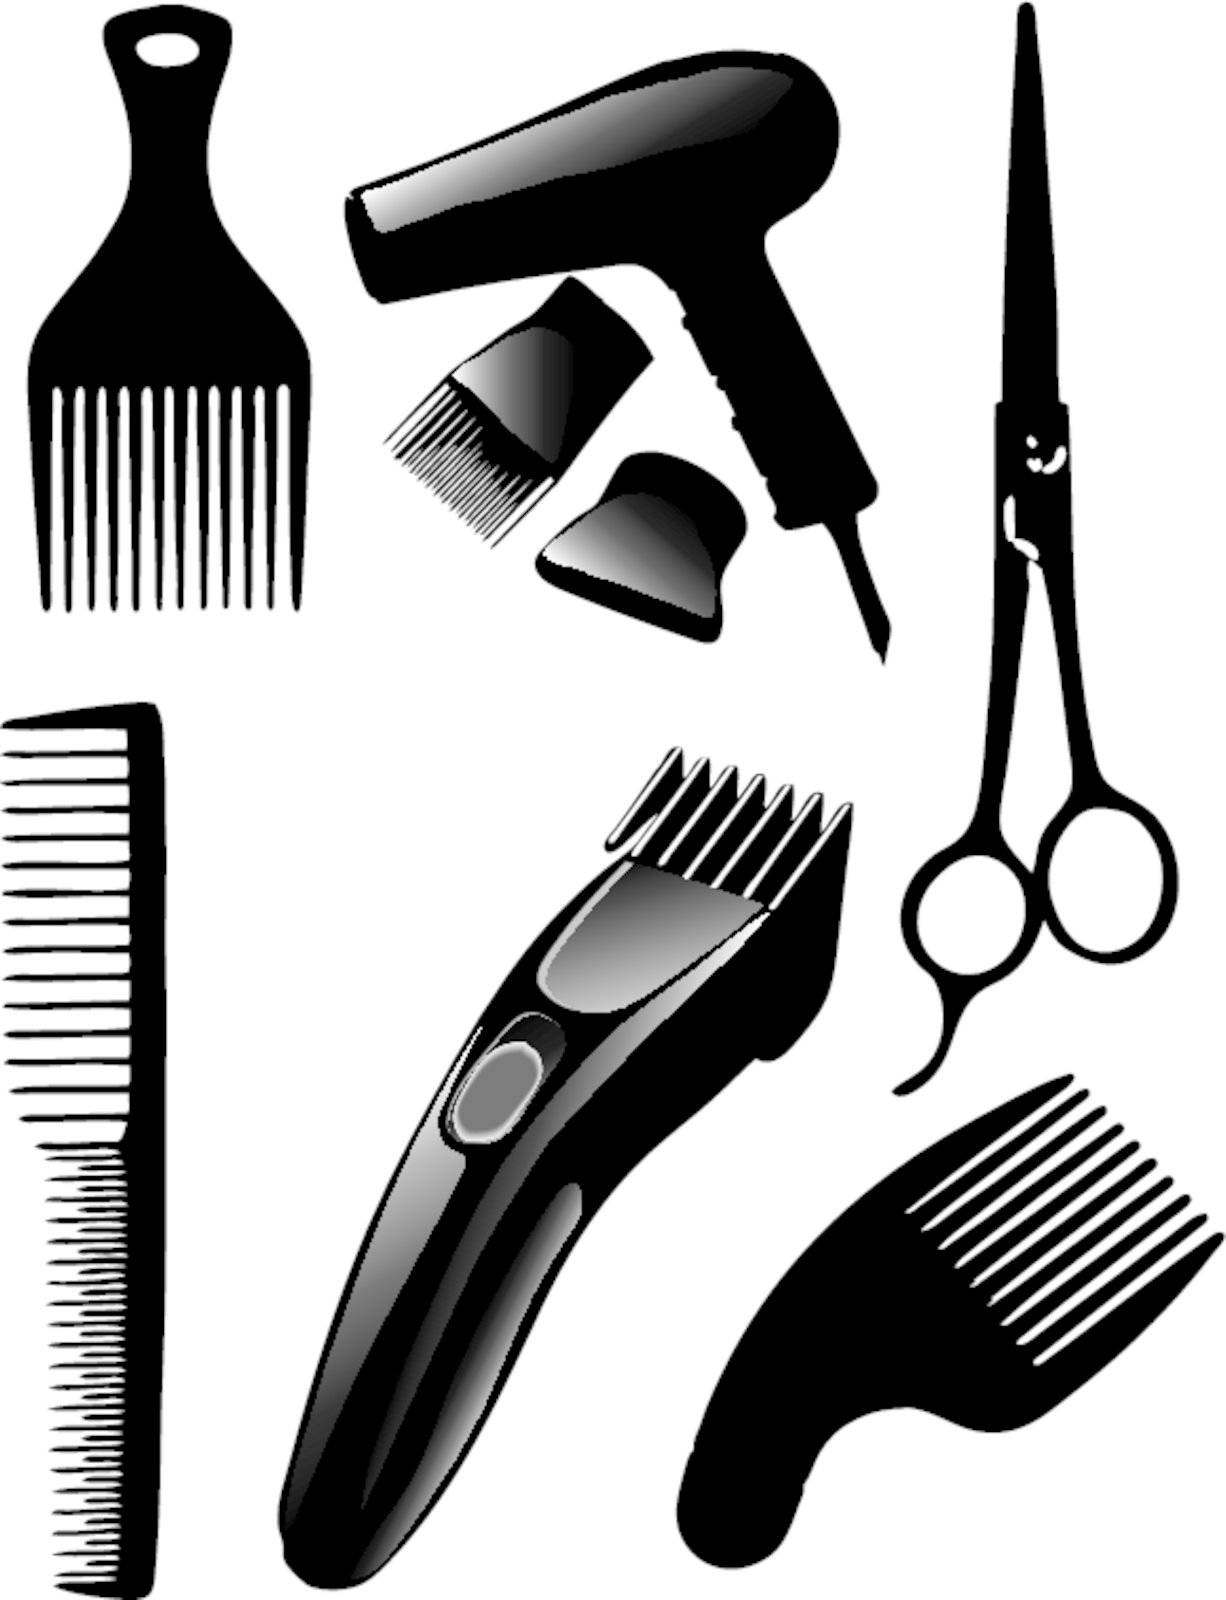 A set of tools for hairdressers. Vector illustration.